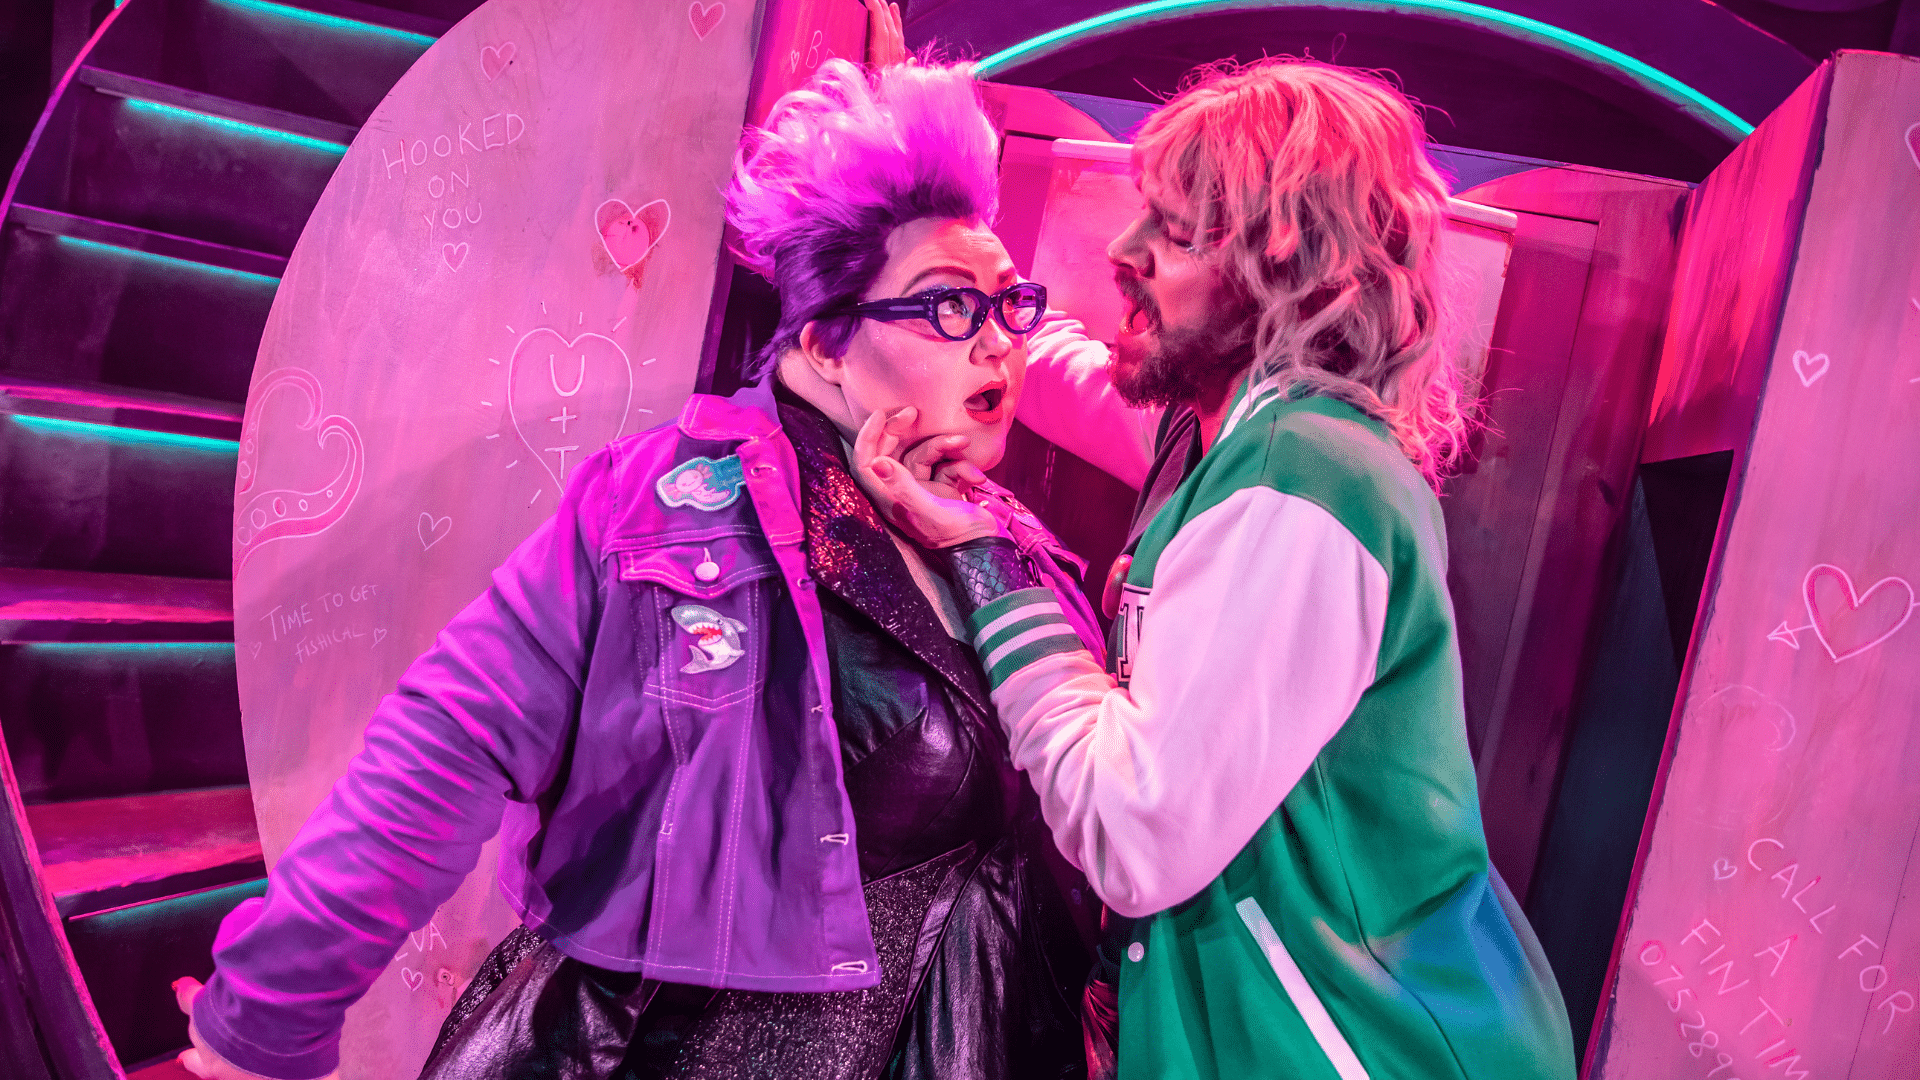 Unfortunate production photo. Ursula (wearing glasses and a denim jacket) looks into the eyes of a man with shoulder-length blonde hair and a green varsity jacket, who is stroking her cheek. Both are singing.